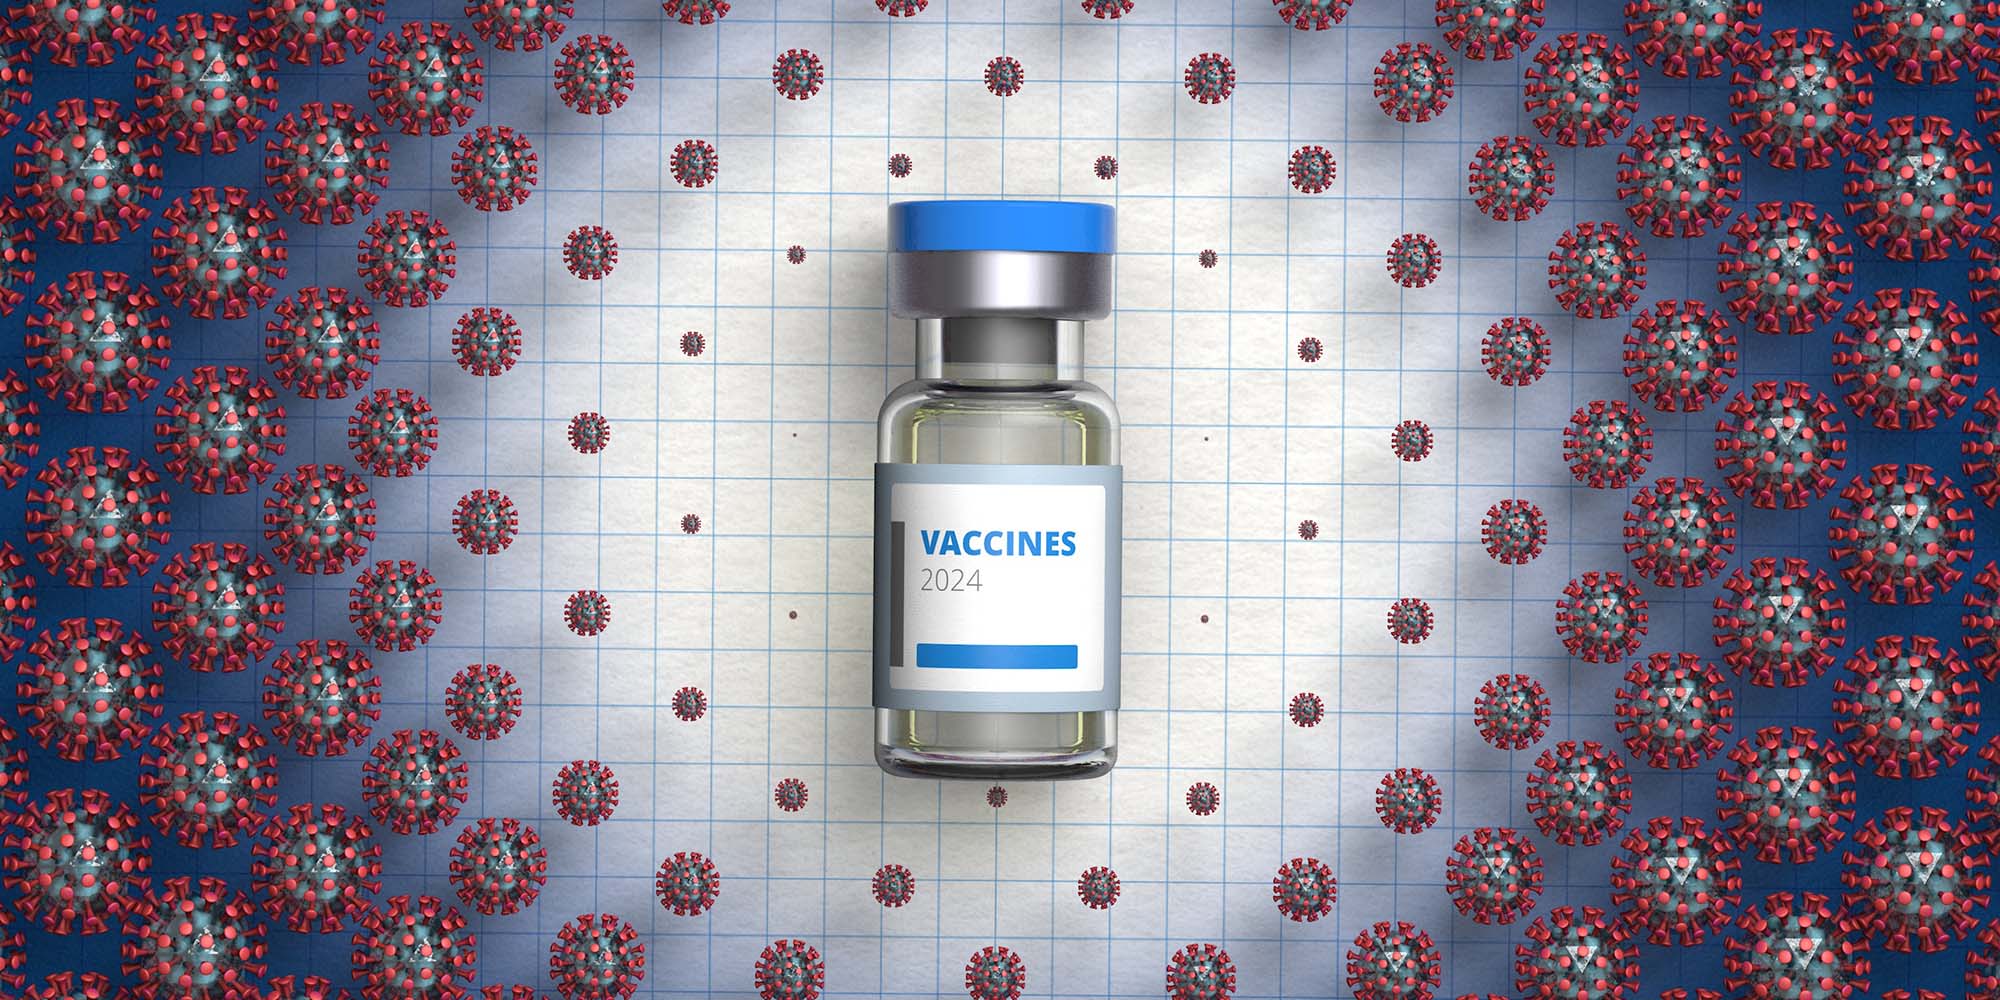 Seasonal influenza and COVID-19 vaccinations: 2024 edition